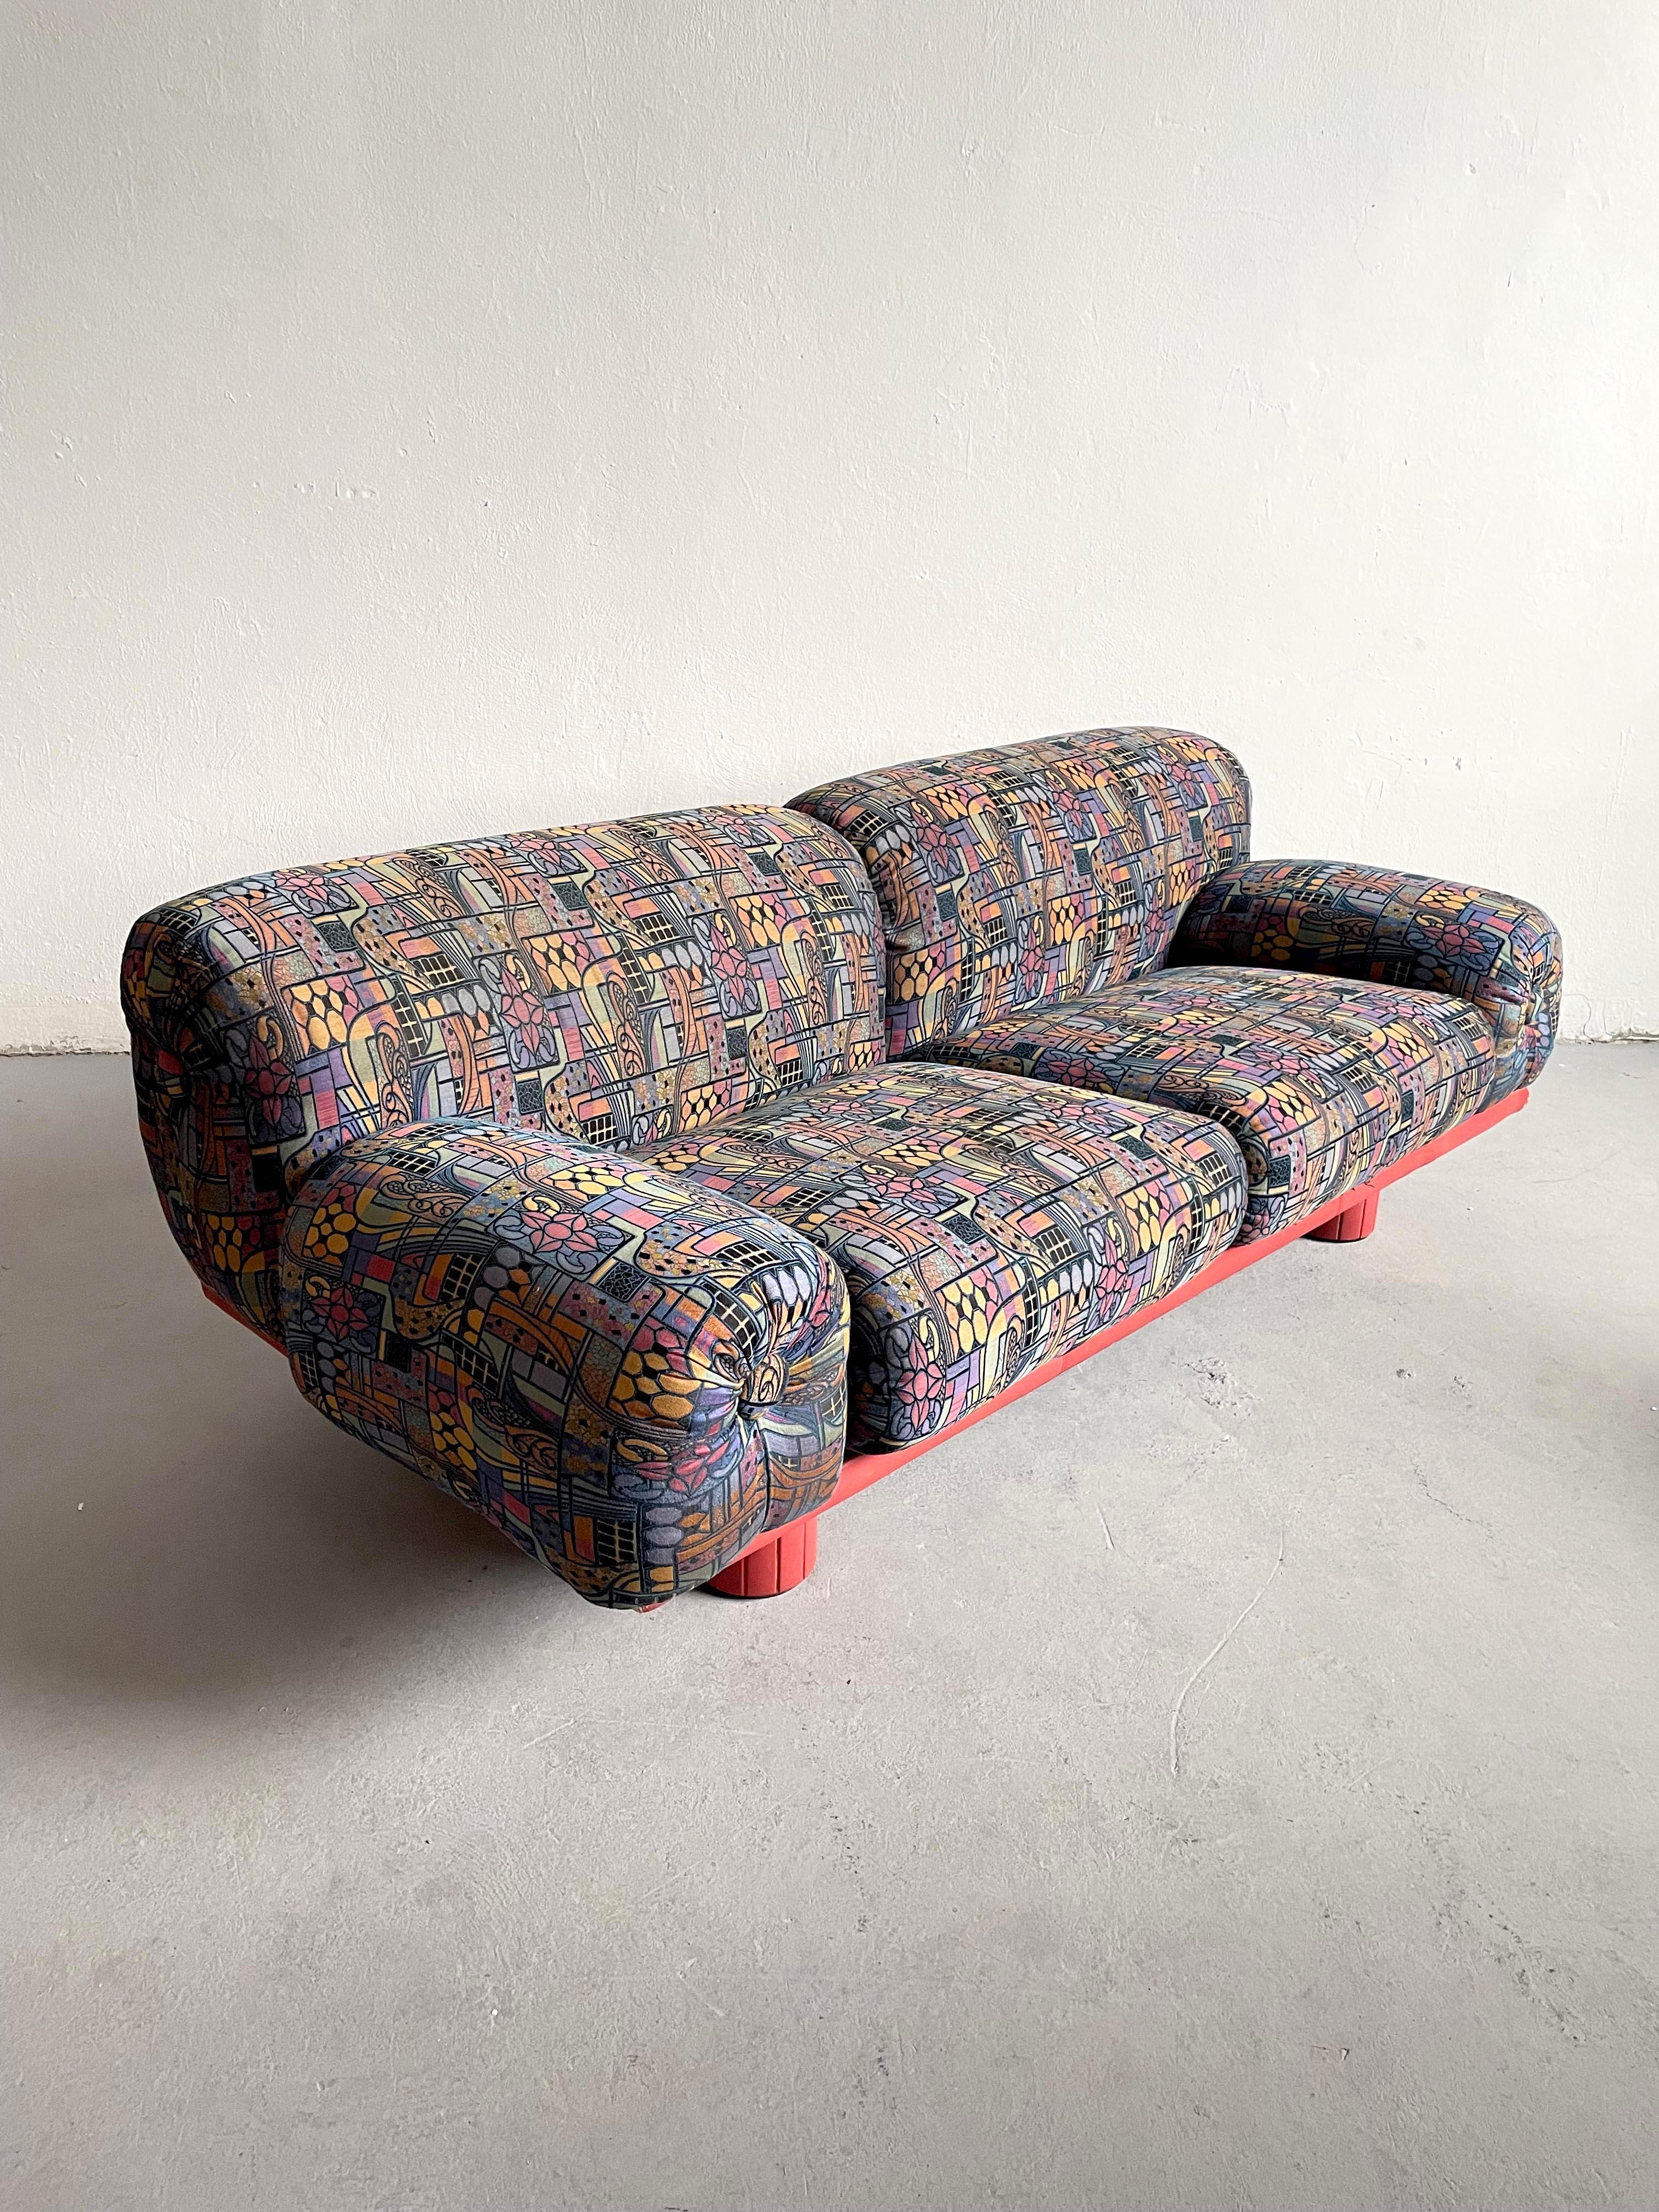 80's couch patterns